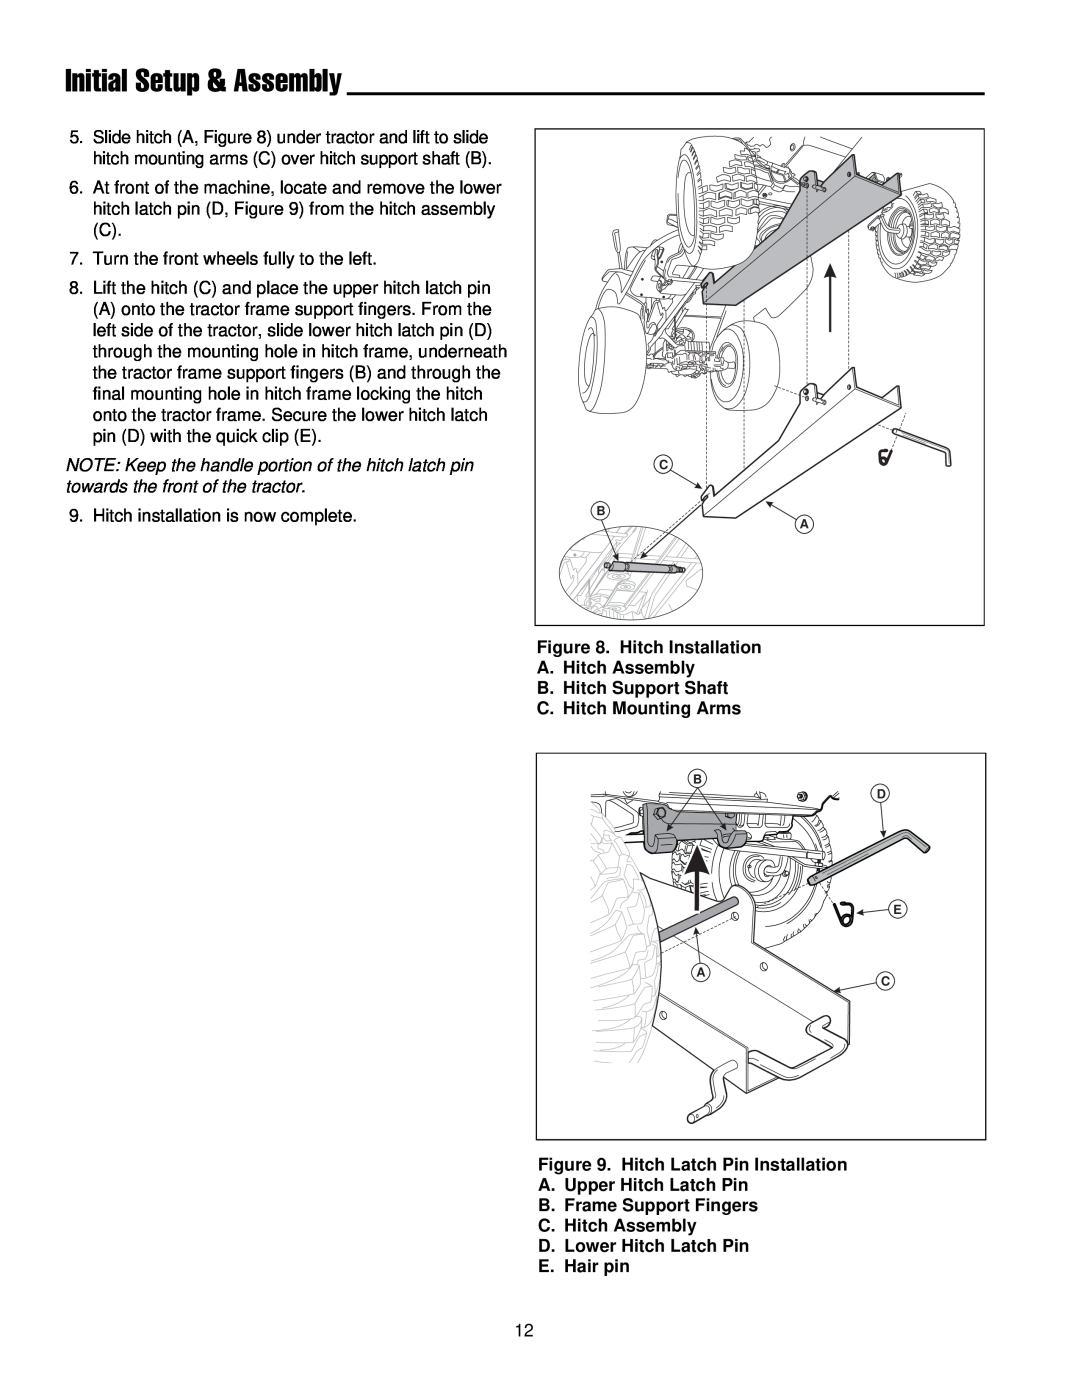 Briggs & Stratton 1694919 manual Initial Setup & Assembly, Hitch Installation A. Hitch Assembly B. Hitch Support Shaft 